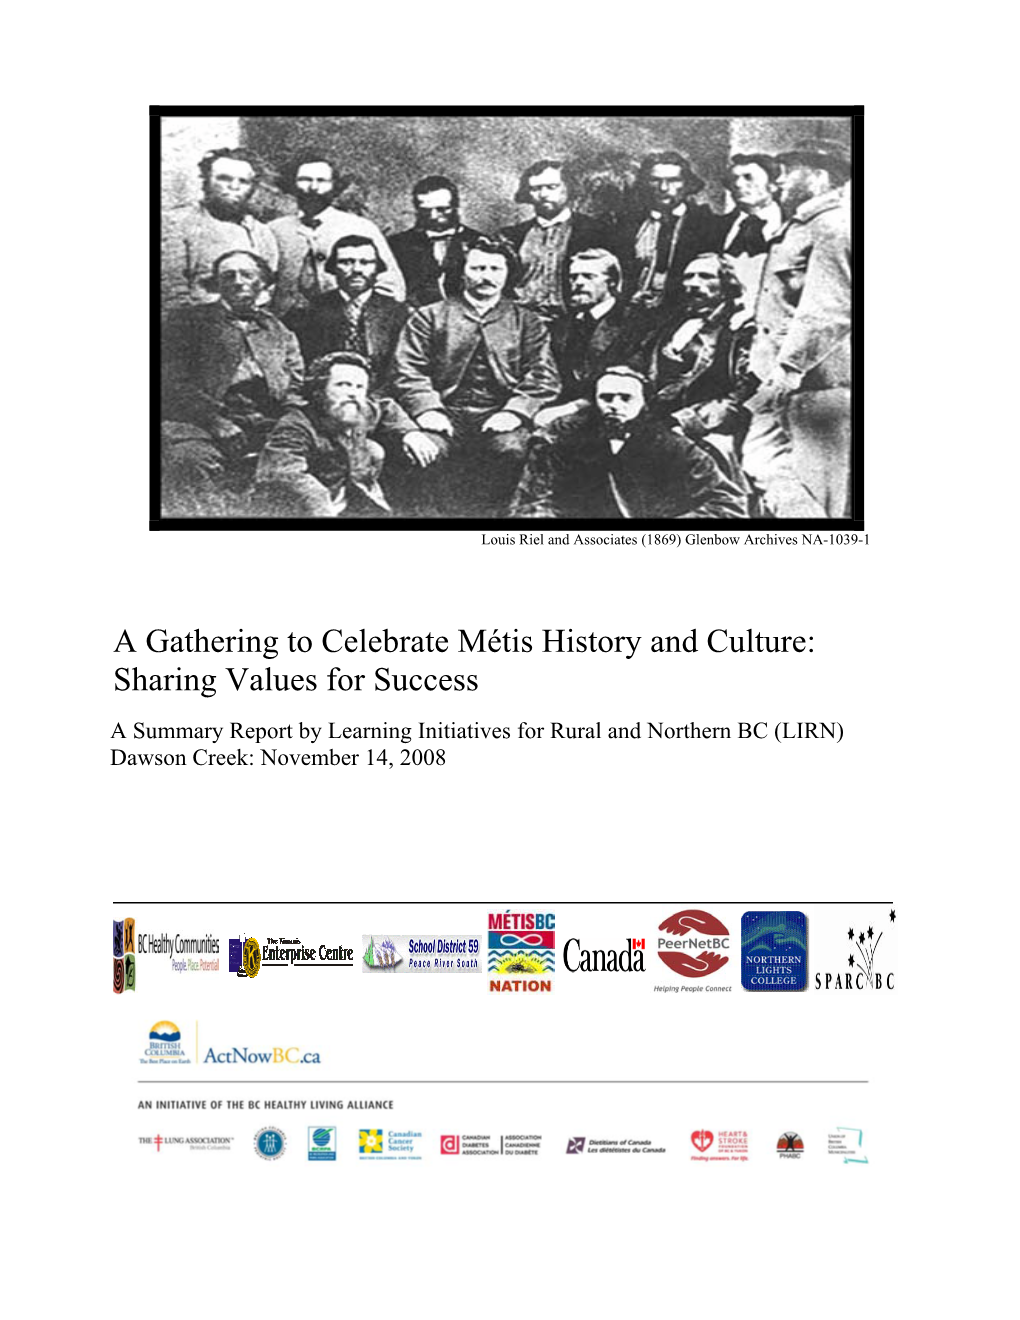 A Gathering to Celebrate Métis History and Culture: Sharing Values for Success